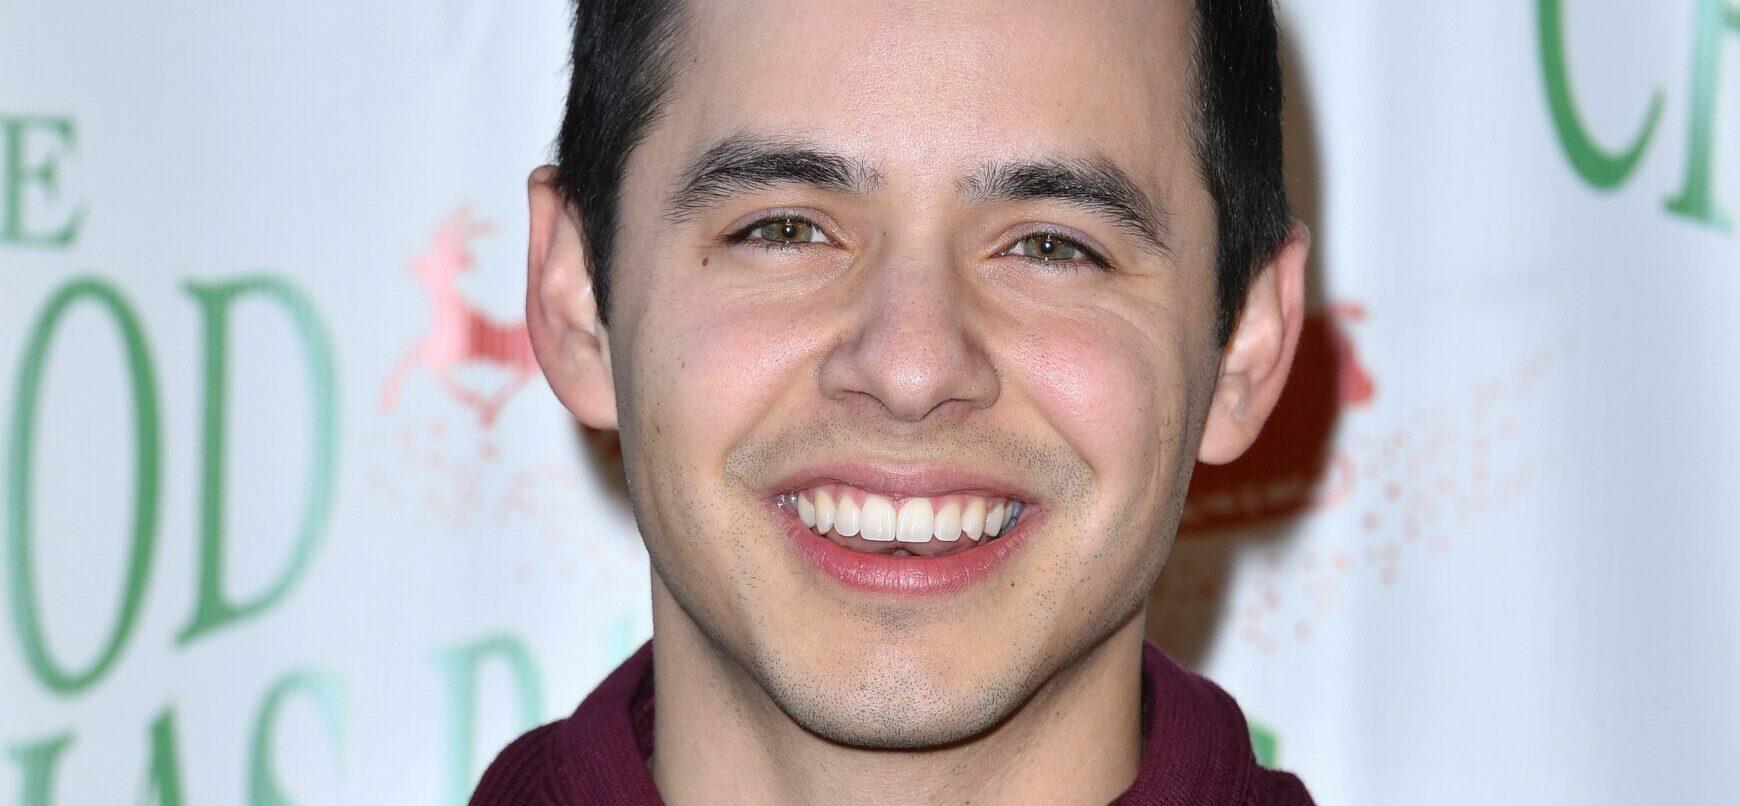 David Archuleta Compares ‘American Idol’ To ‘Some Weird Grooming Process’